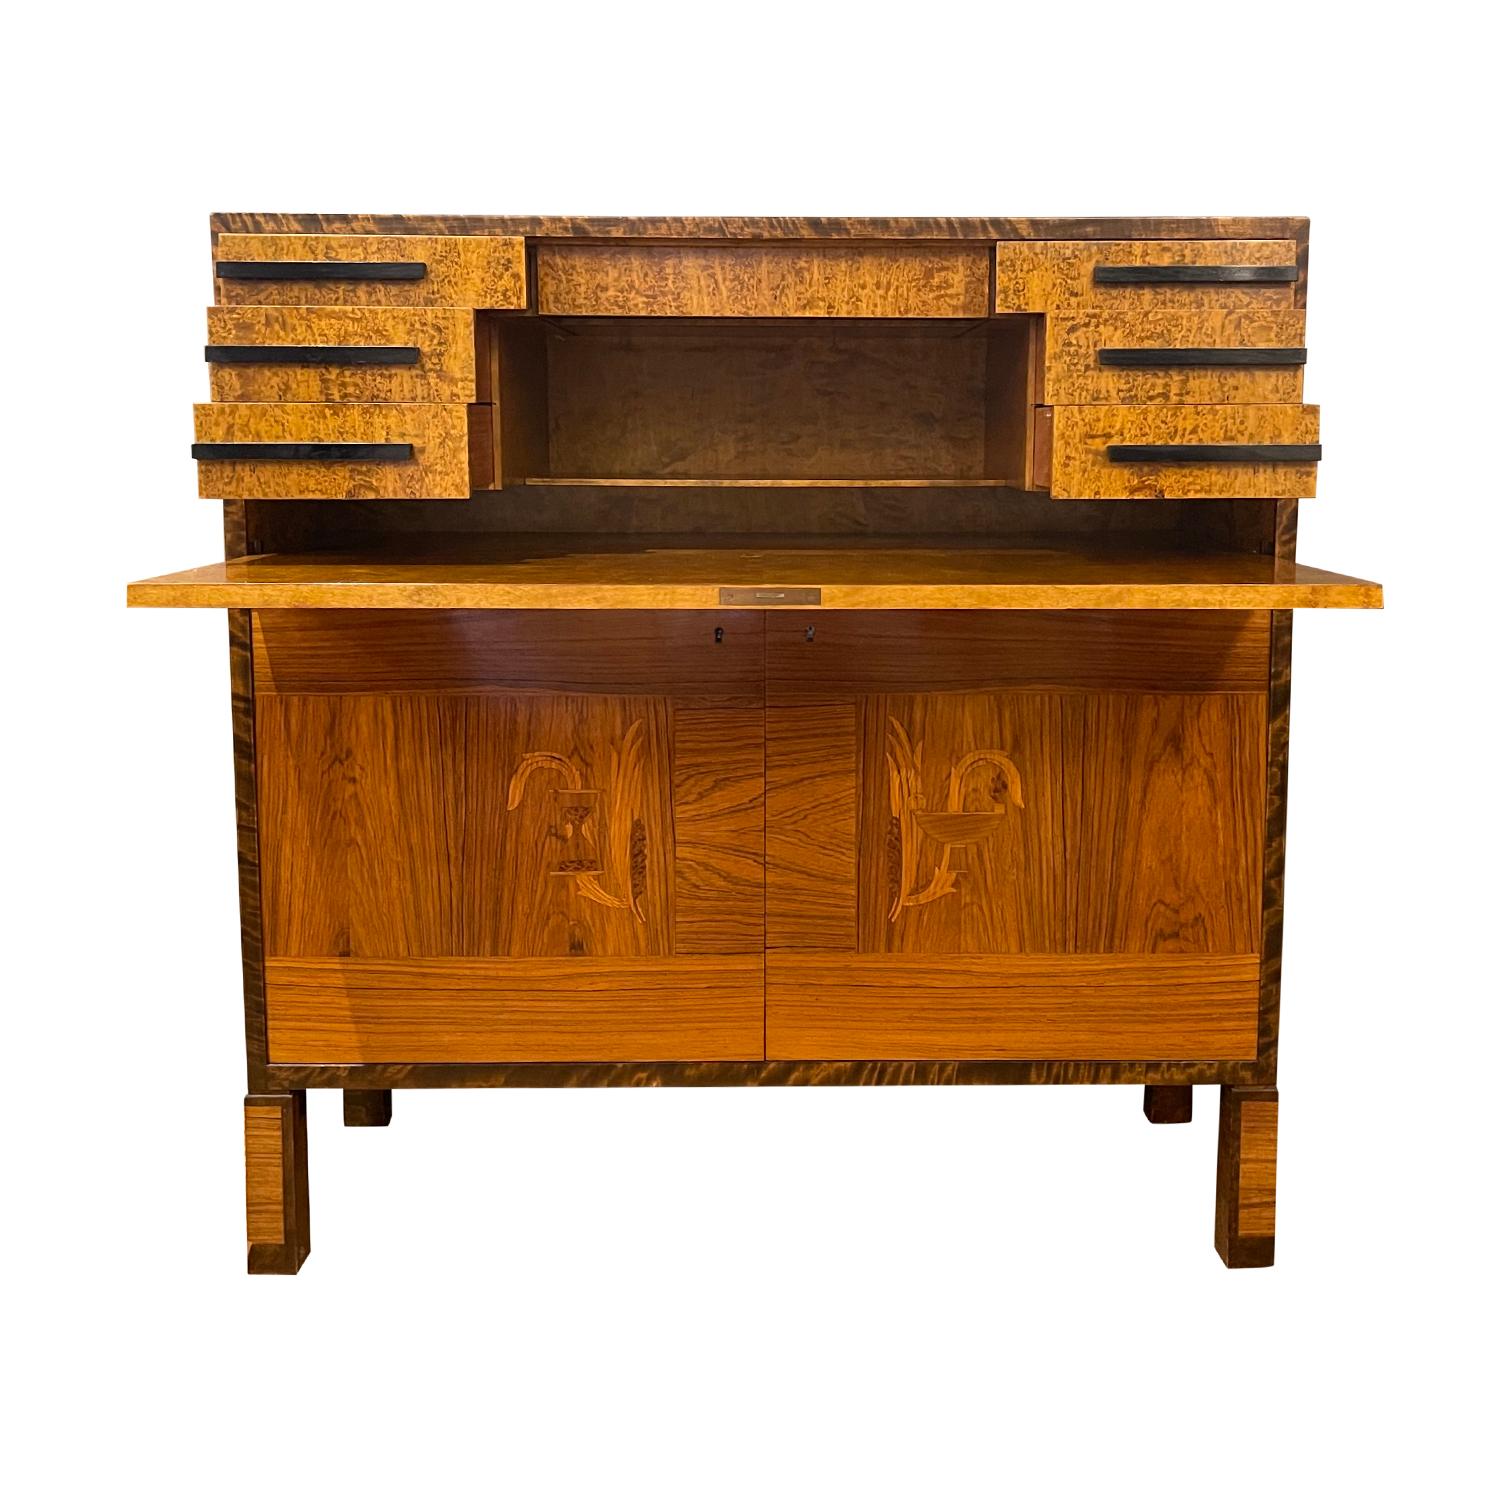 A vintage Mid-Century Modern Swedish secretary desk signed by the A.B. Svenska Moebel Fabrikerna (SMF), one of the largest furniture manufacturers in Bodafors, Sweden, most likely a piece from Axel Larsson. The secretary is made out of a varieties